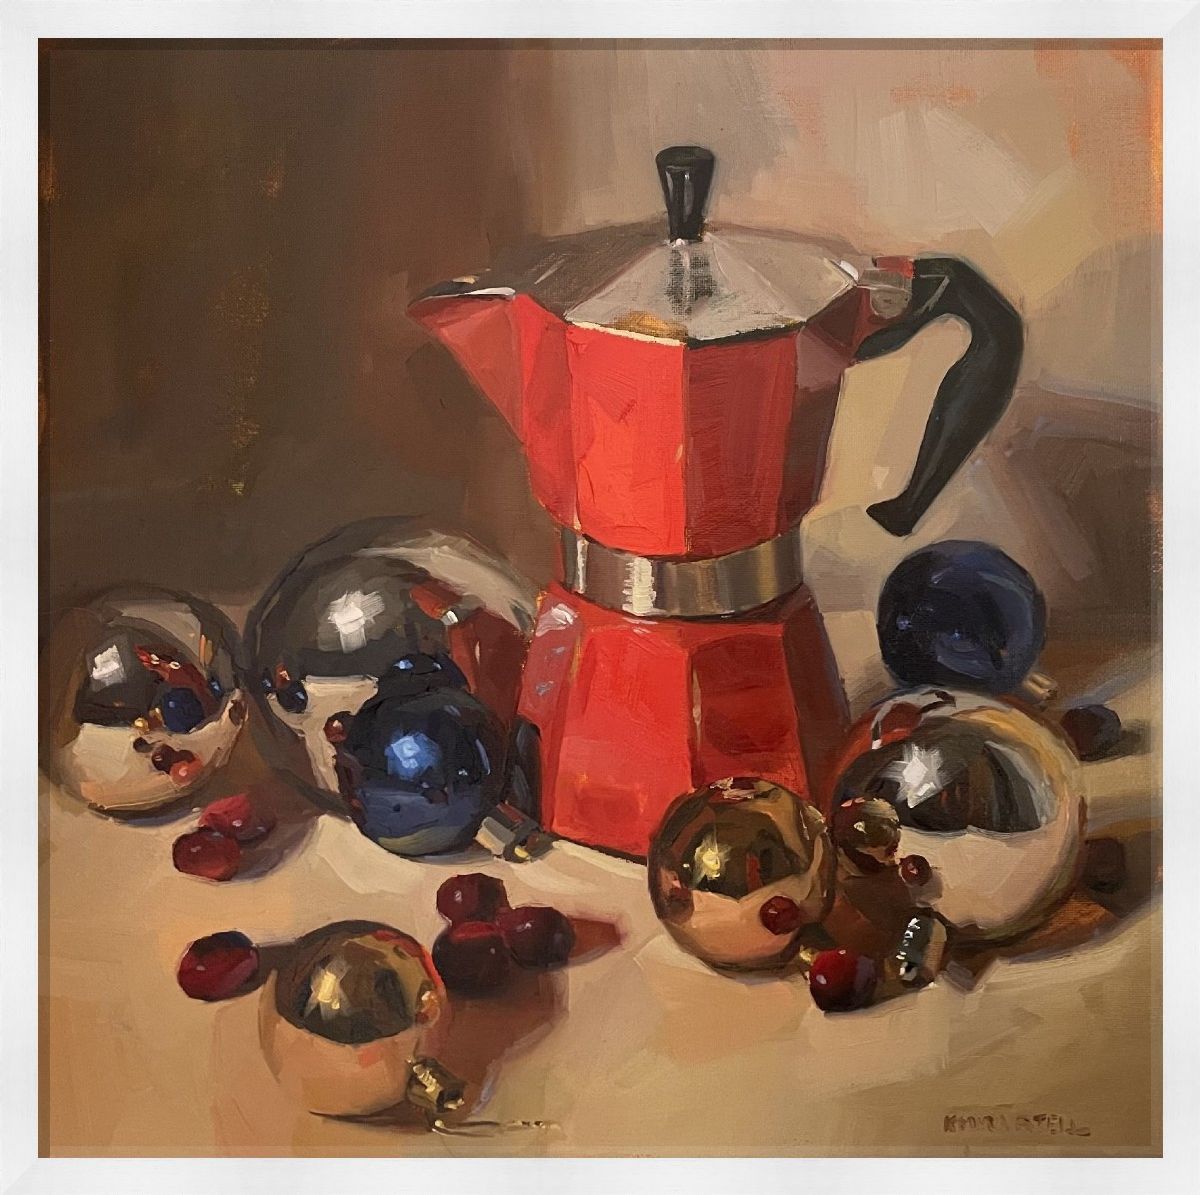 Baubles and Coffee  by Kayla Martell